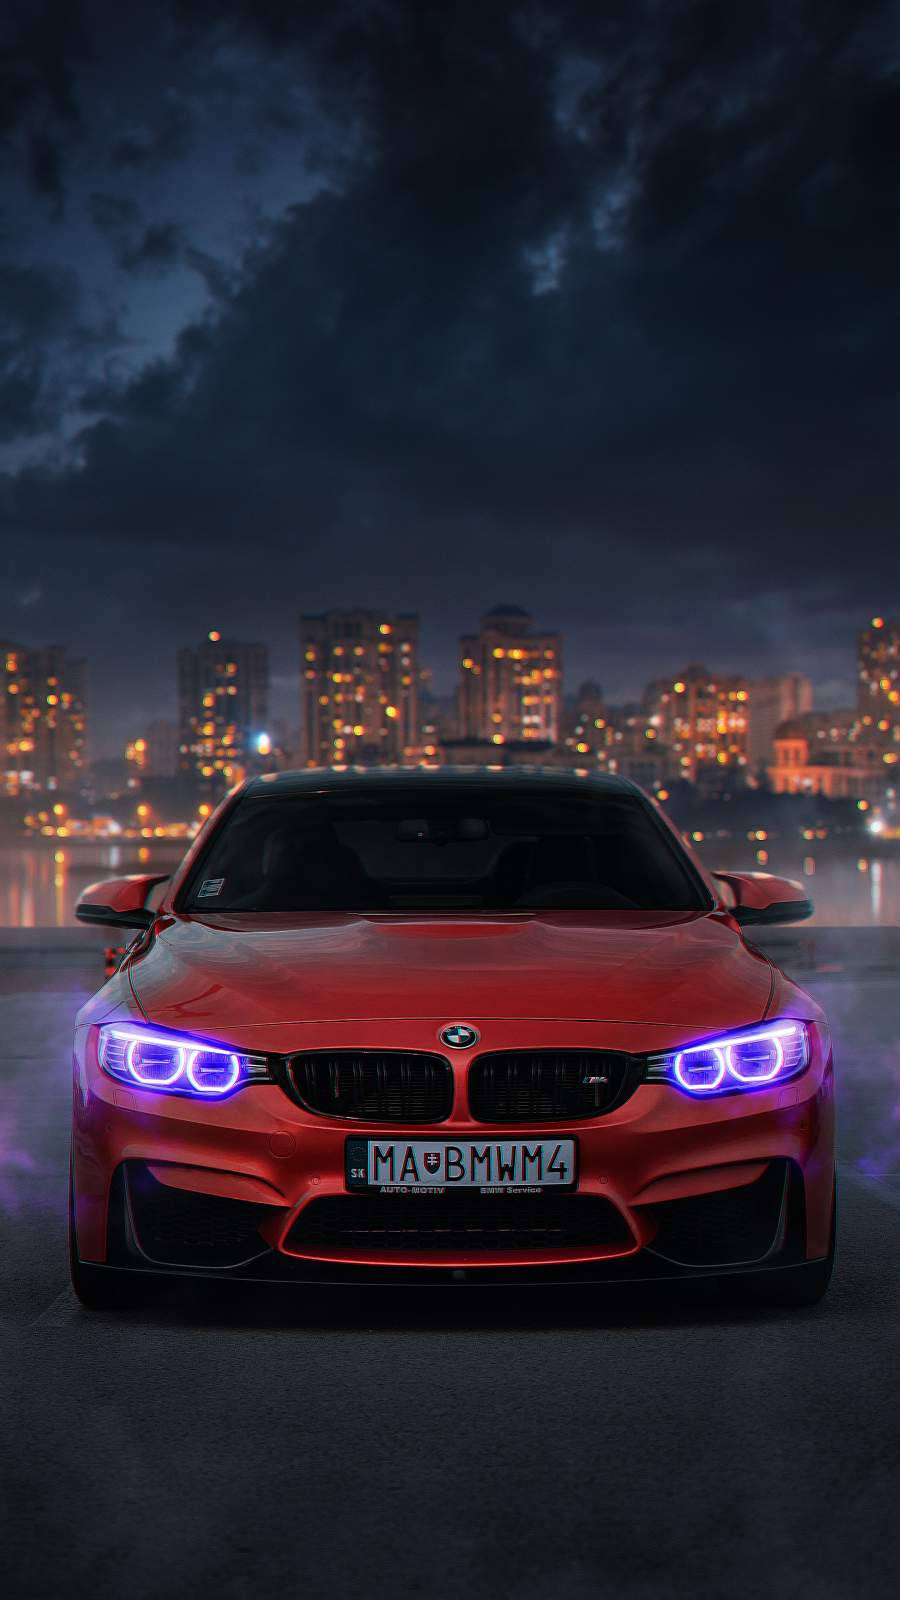 38 Cool Cars Wallpapers for iPhone on WallpaperSafari  Car wallpapers Car  iphone wallpaper Porsche iphone wallpaper